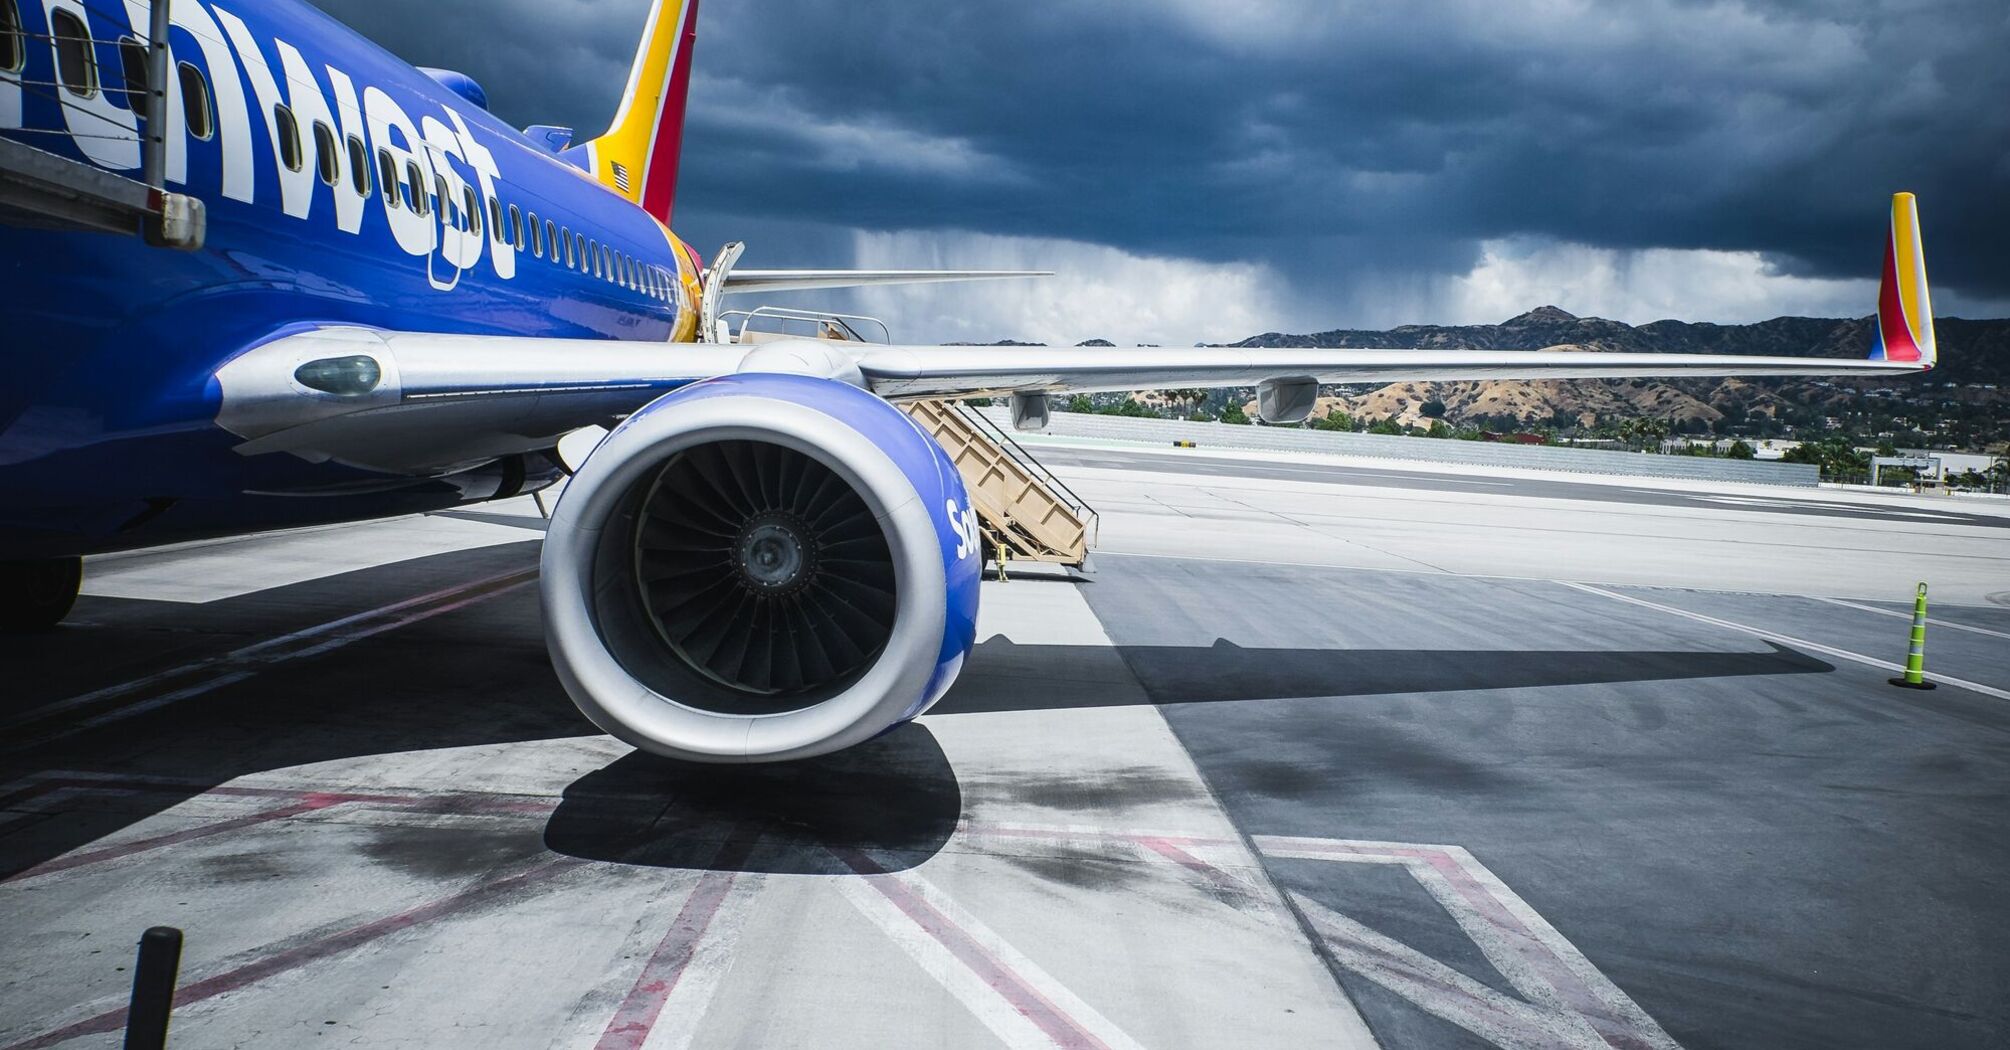 Southwest Airlines aircraft parked at an airport gate with the boarding stairs attached, under a stormy sky